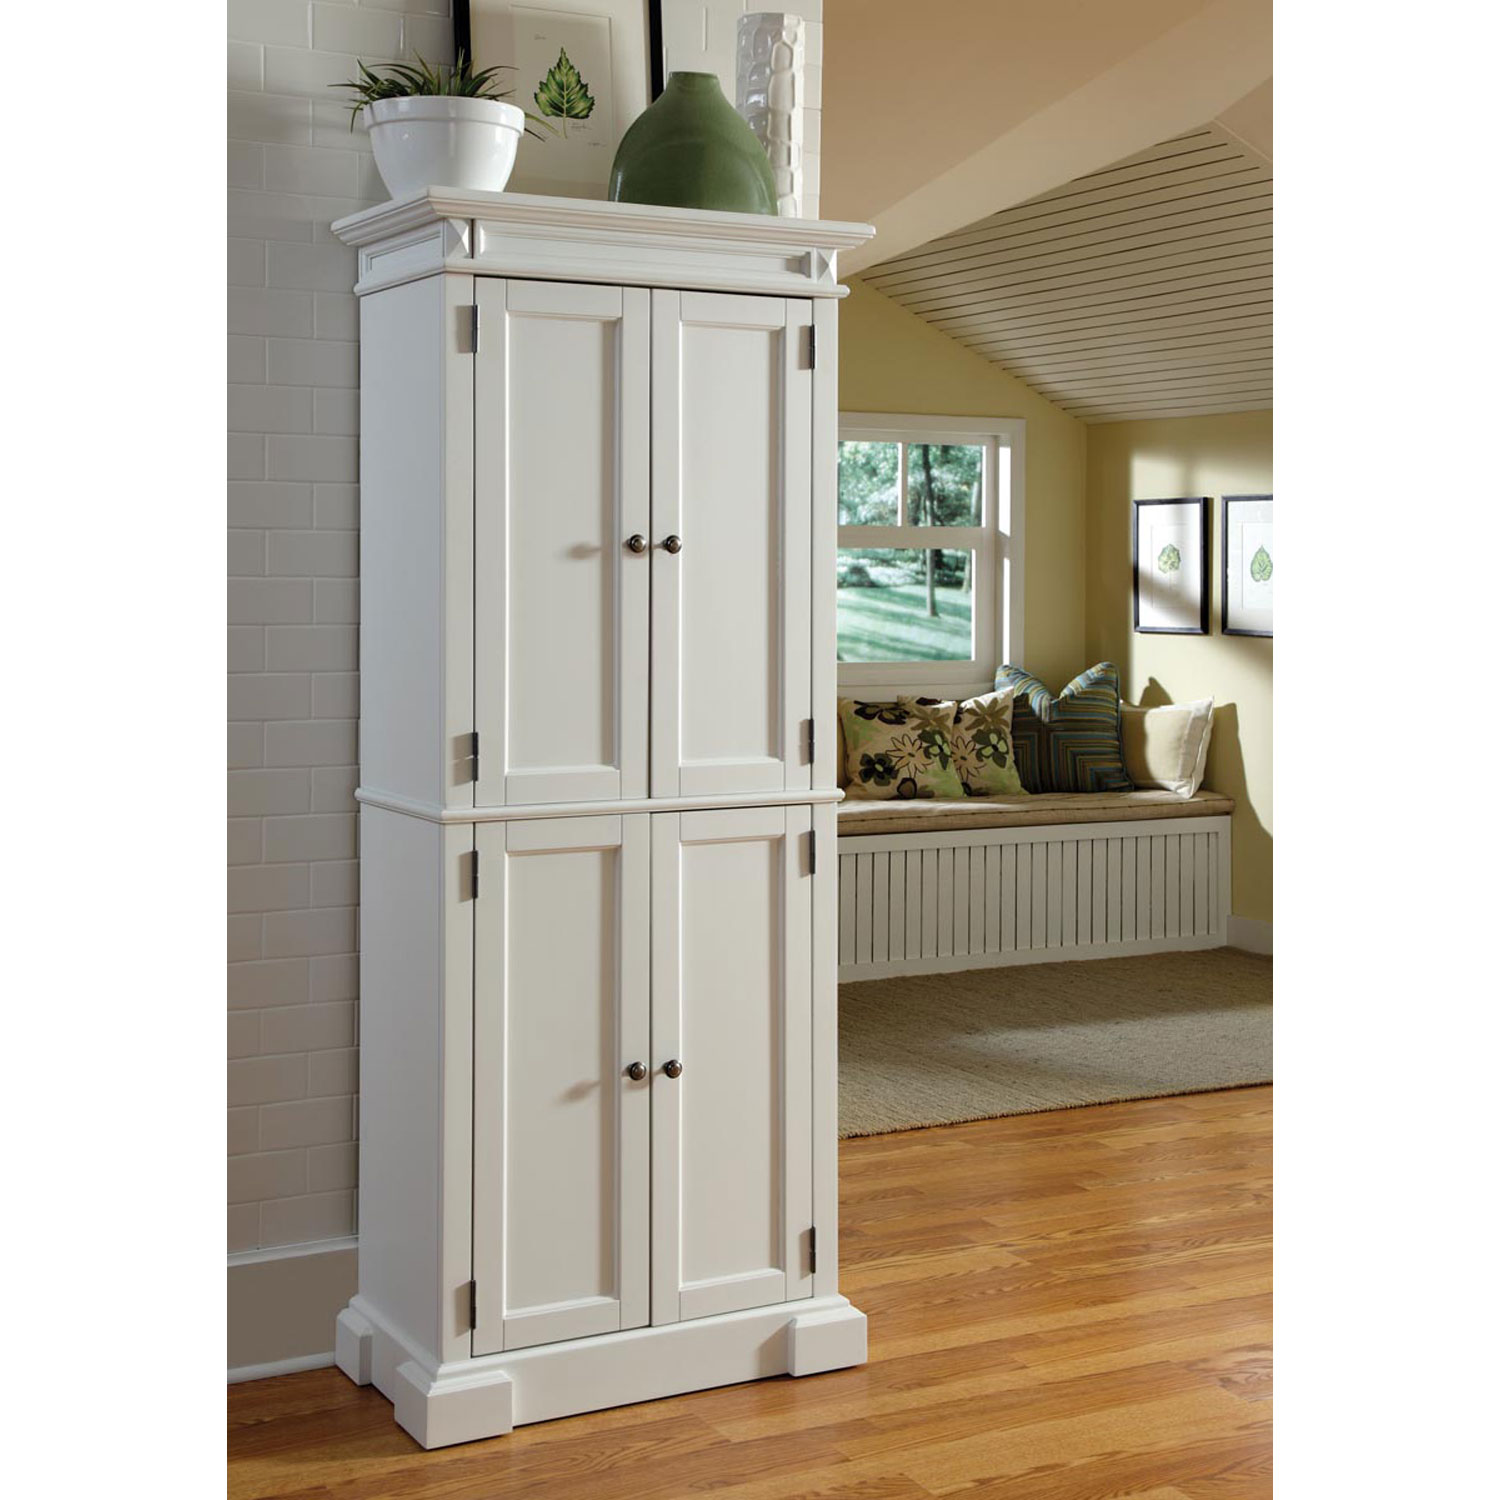 Bakers Racks and Pantry Cabinets Category